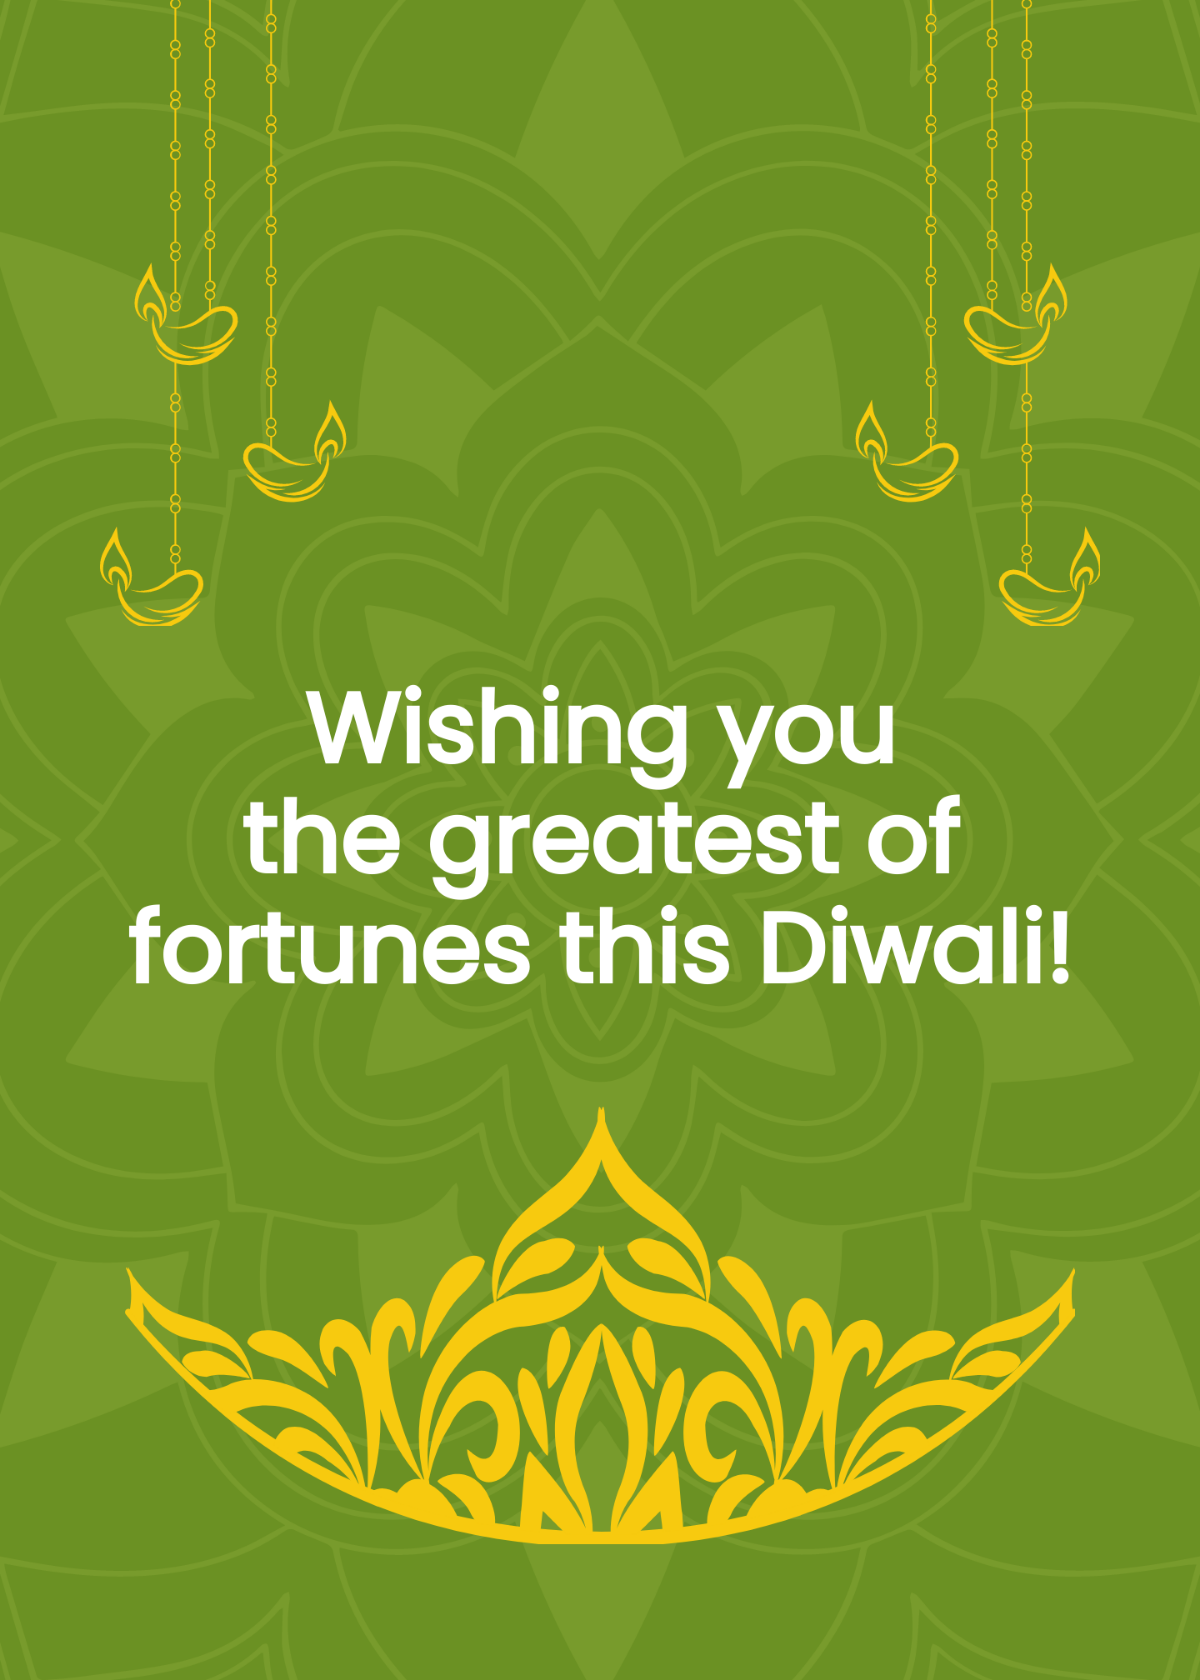 Diwali Day Wishes Template